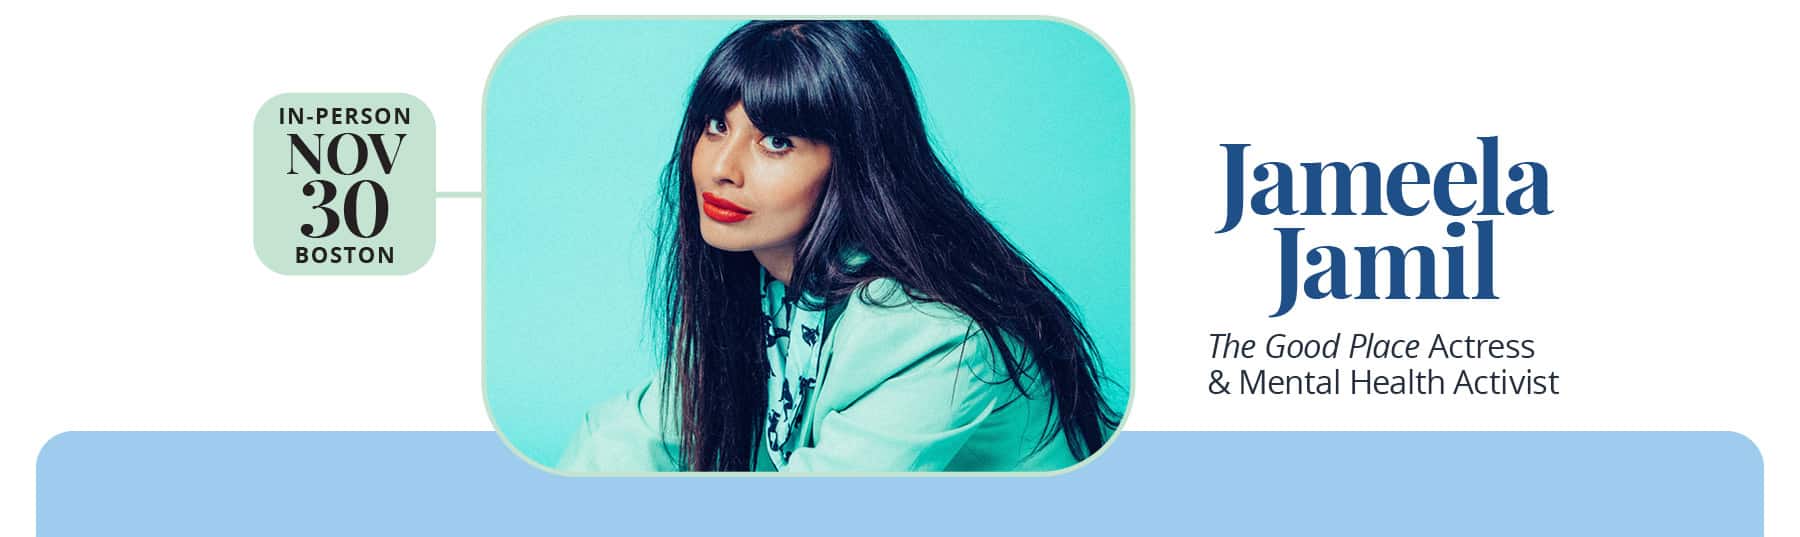 Join Jameela Jamil in-person on November 30th at the Massachusetts Conference for Women